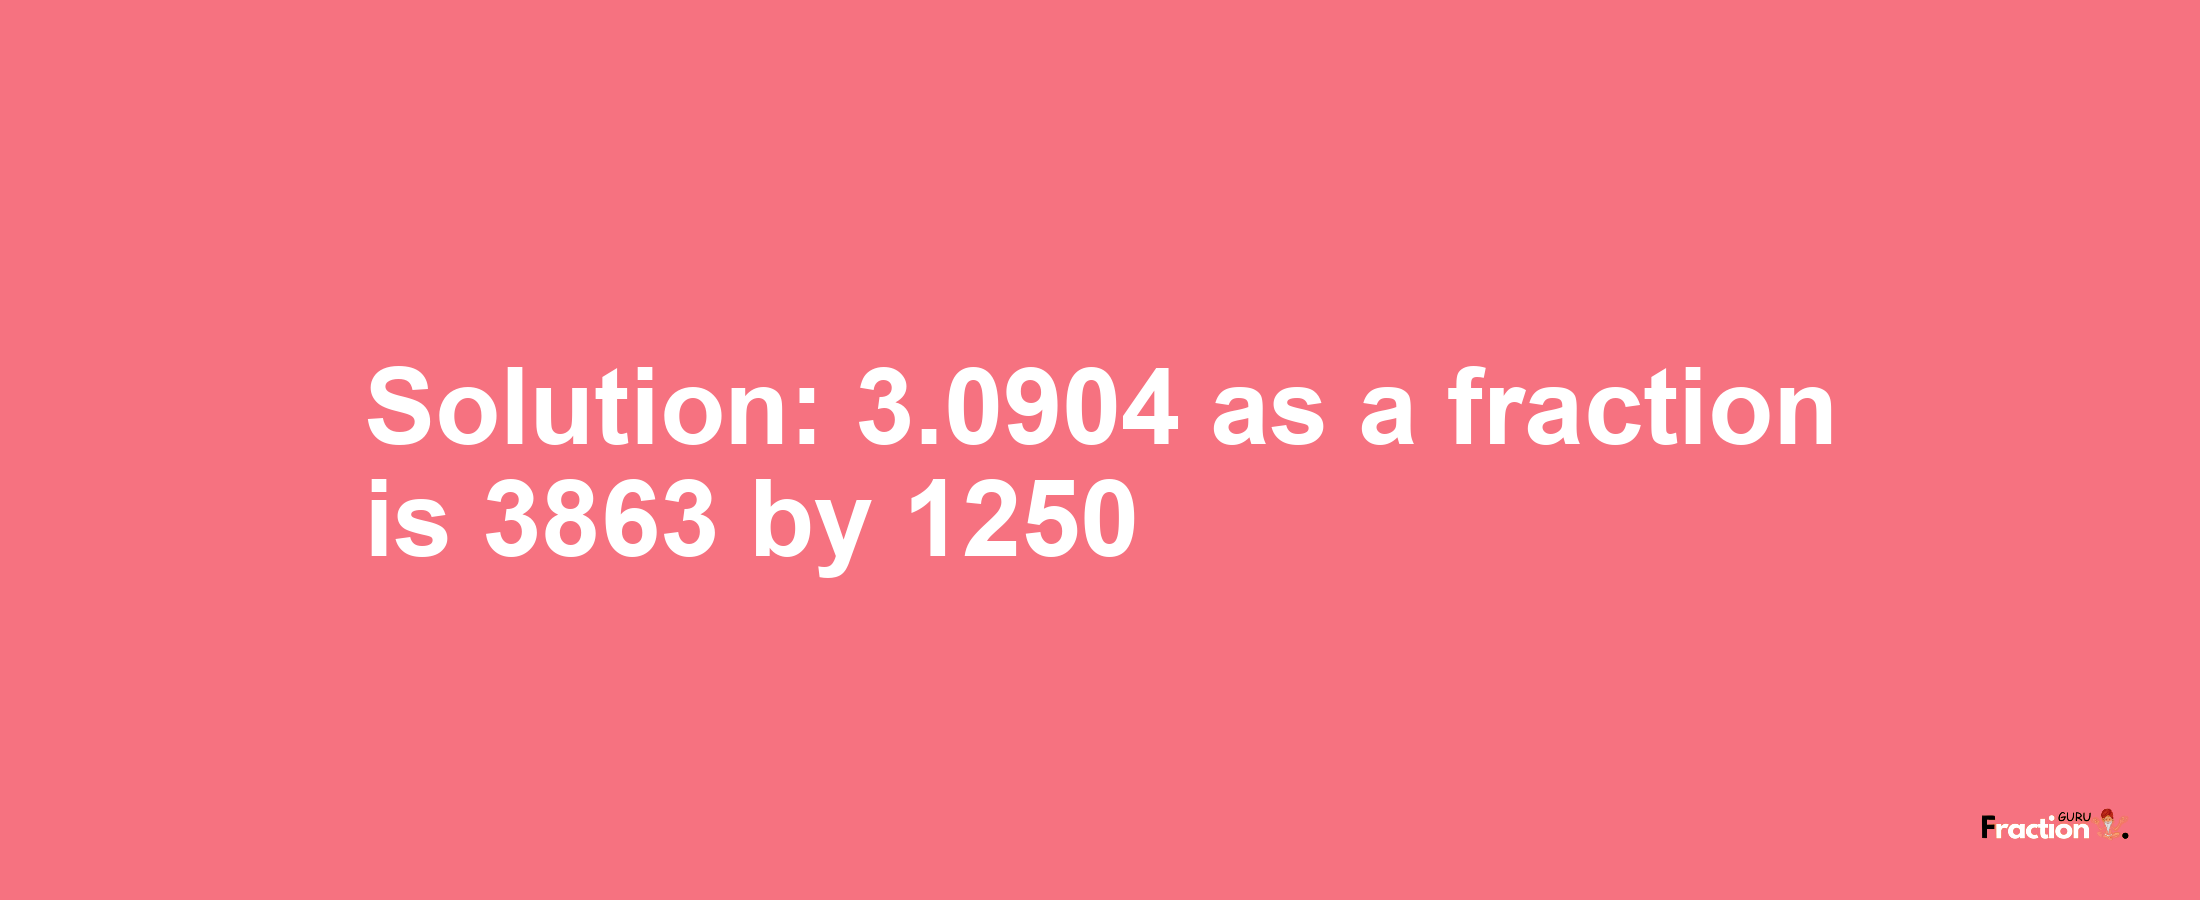 Solution:3.0904 as a fraction is 3863/1250